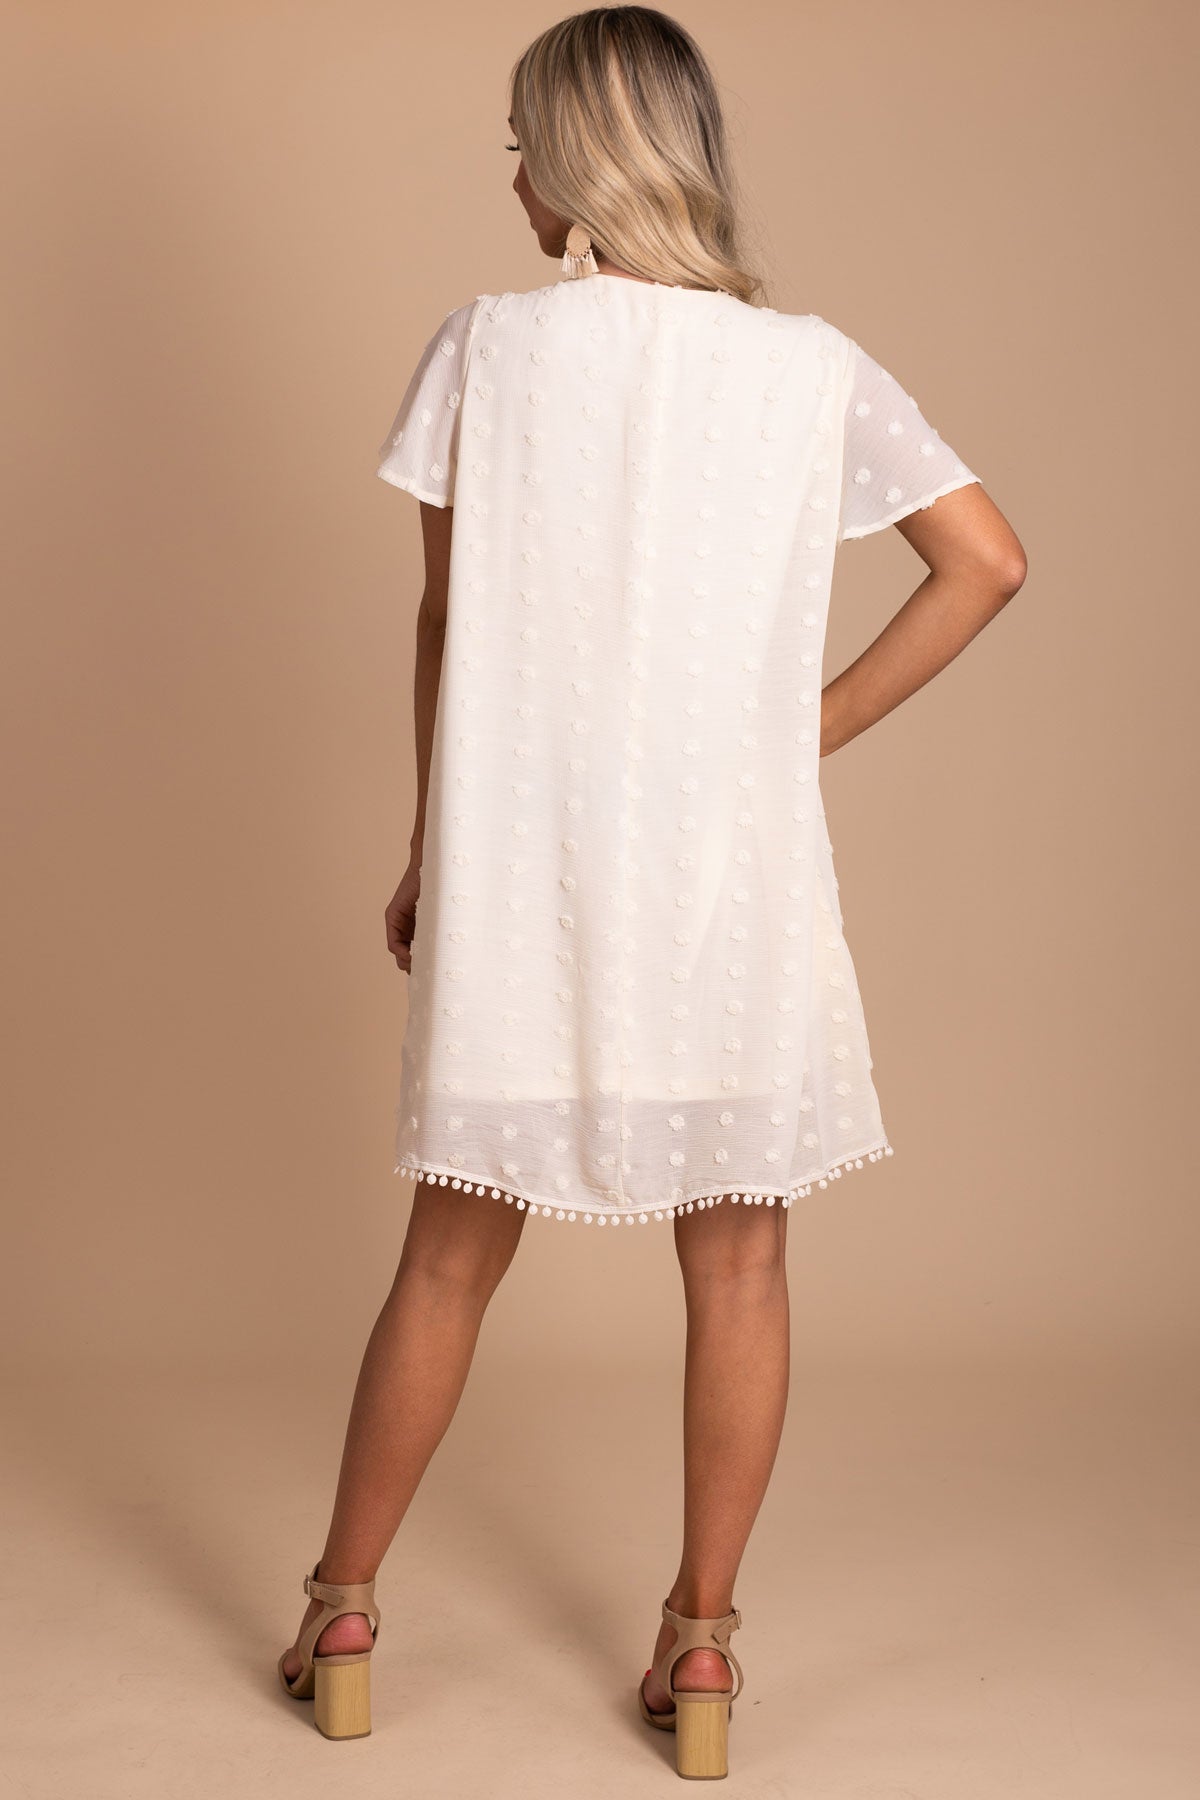 Off White Women's Spring and Summer Dress